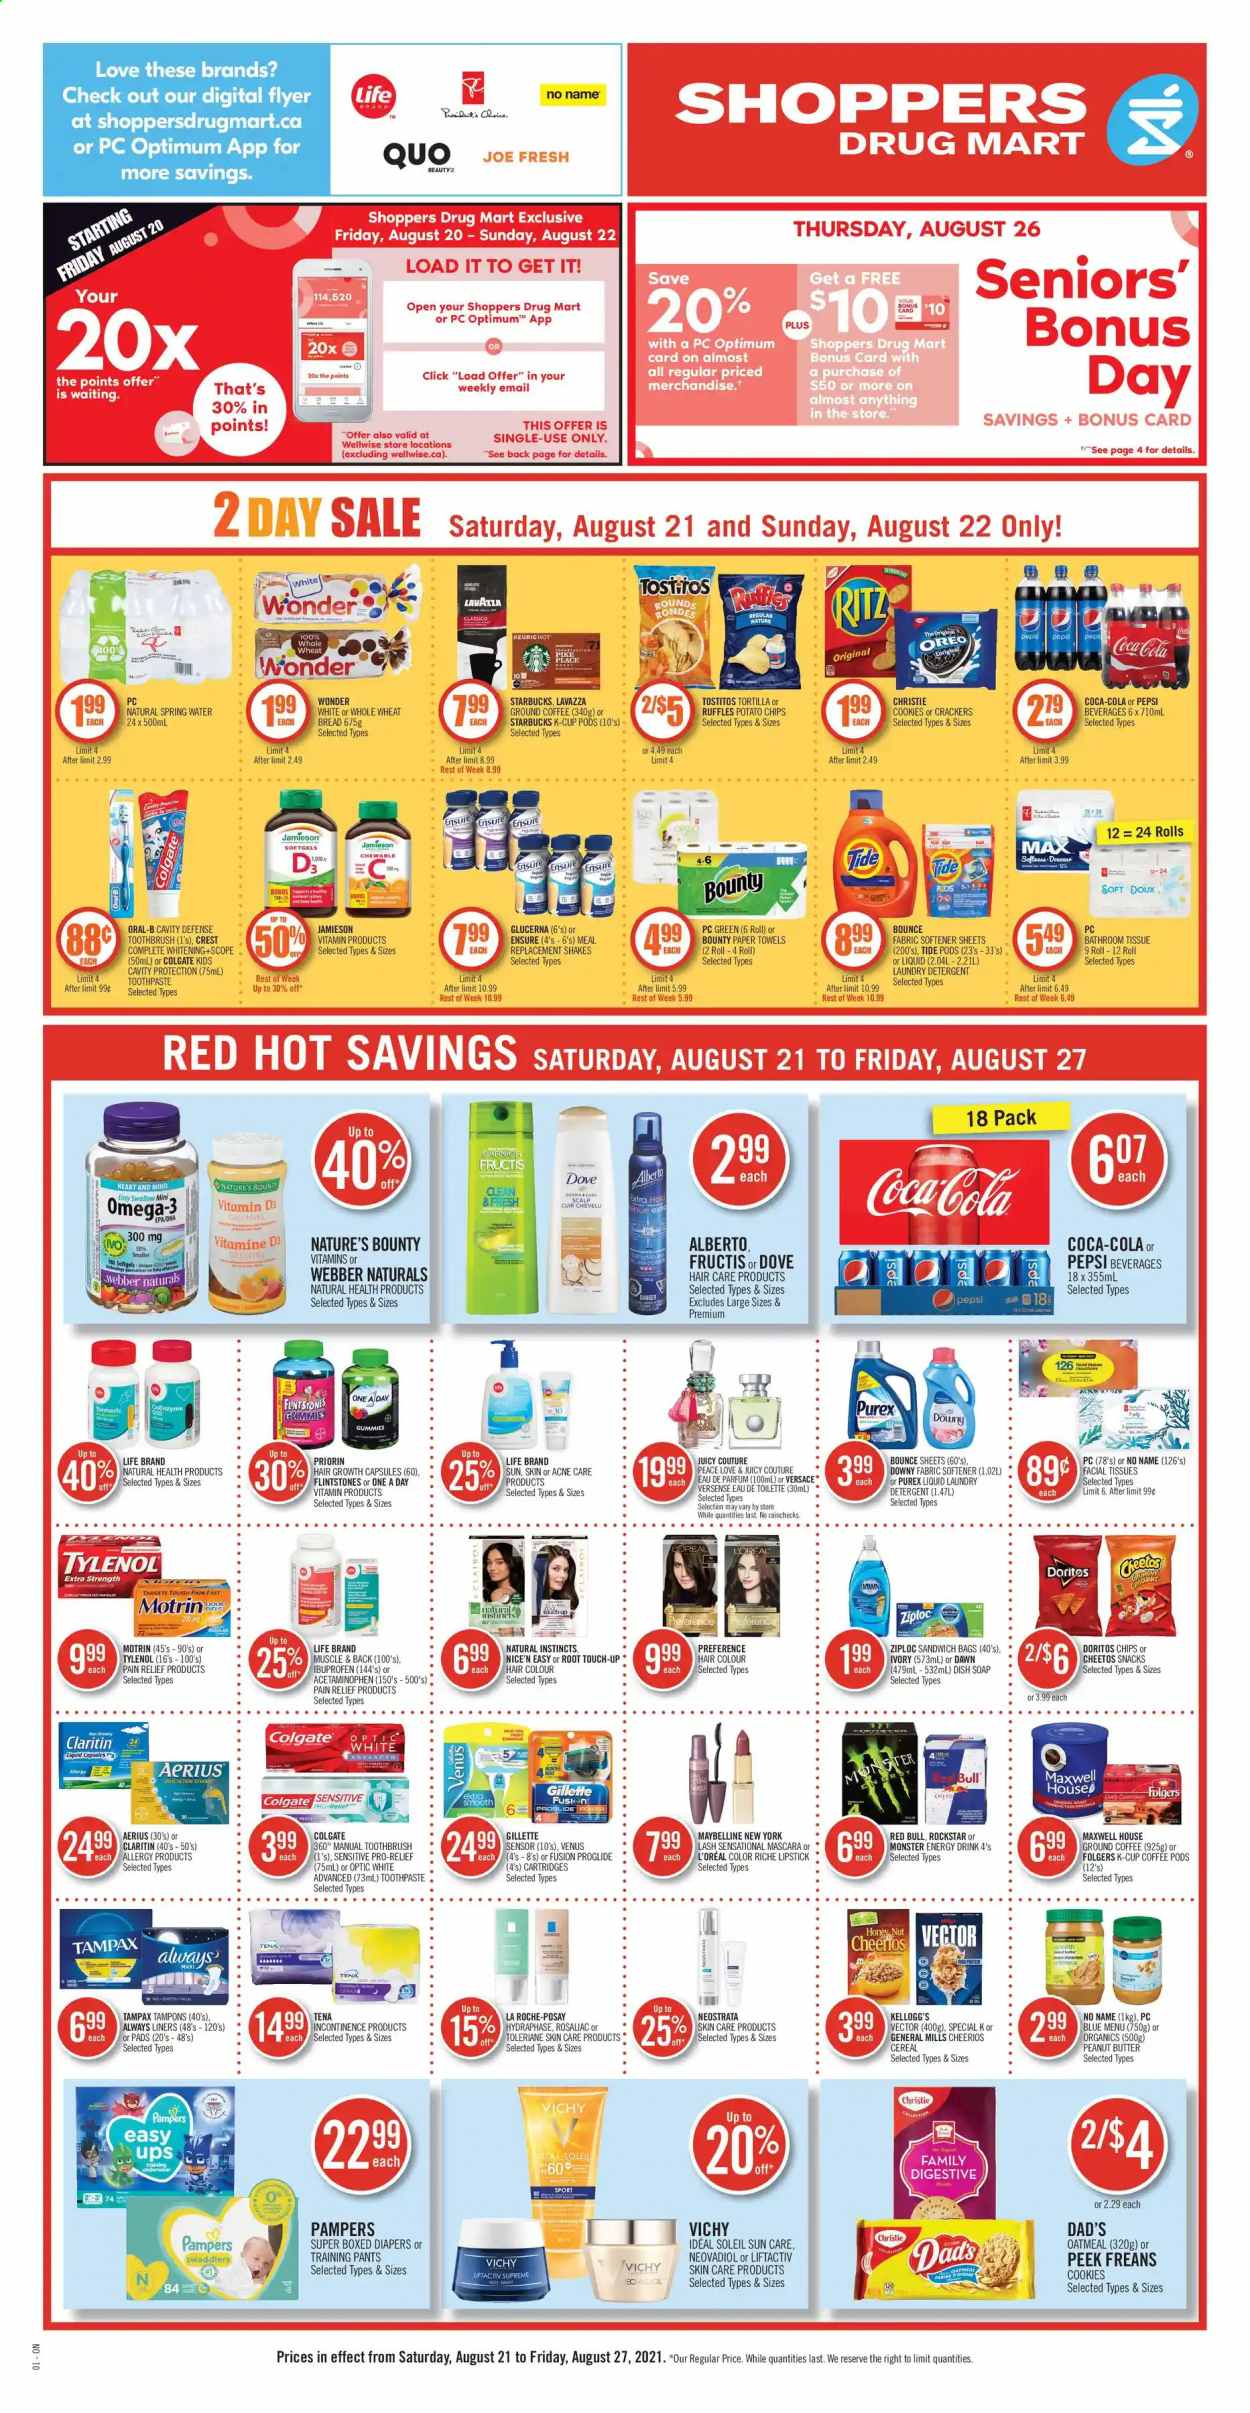 thumbnail - Shoppers Drug Mart Flyer - August 21, 2021 - August 27, 2021 - Sales products - cookies, snack, crackers, Kellogg's, RITZ, Doritos, tortillas, potato chips, Cheetos, Ruffles, Tostitos, oatmeal, cereals, Cheerios, Classico, peanut butter, Coca-Cola, Pepsi, energy drink, Monster, Red Bull, Monster Energy, Rockstar, spring water, Maxwell House, coffee pods, Folgers, ground coffee, coffee capsules, Starbucks, K-Cups, Keurig, Lavazza, pants, nappies, baby pants, bath tissue, Always liners, kitchen towels, paper towels, Tide, fabric softener, laundry detergent, Bounce, Purex, Downy Laundry, Vichy, soap, toothbrush, toothpaste, Crest, tampons, facial tissues, L’Oréal, La Roche-Posay, Root Touch-Up, hair color, Fructis, Venus, Ziploc, lipstick, pain relief, Nature's Bounty, Tylenol, Ibuprofen, Glucerna, vitamin D3, Motrin, Oreo, Garnier, Gillette, mascara, Maybelline, Tampax, Versace, Pampers, Oral-B, chips. Page 1.